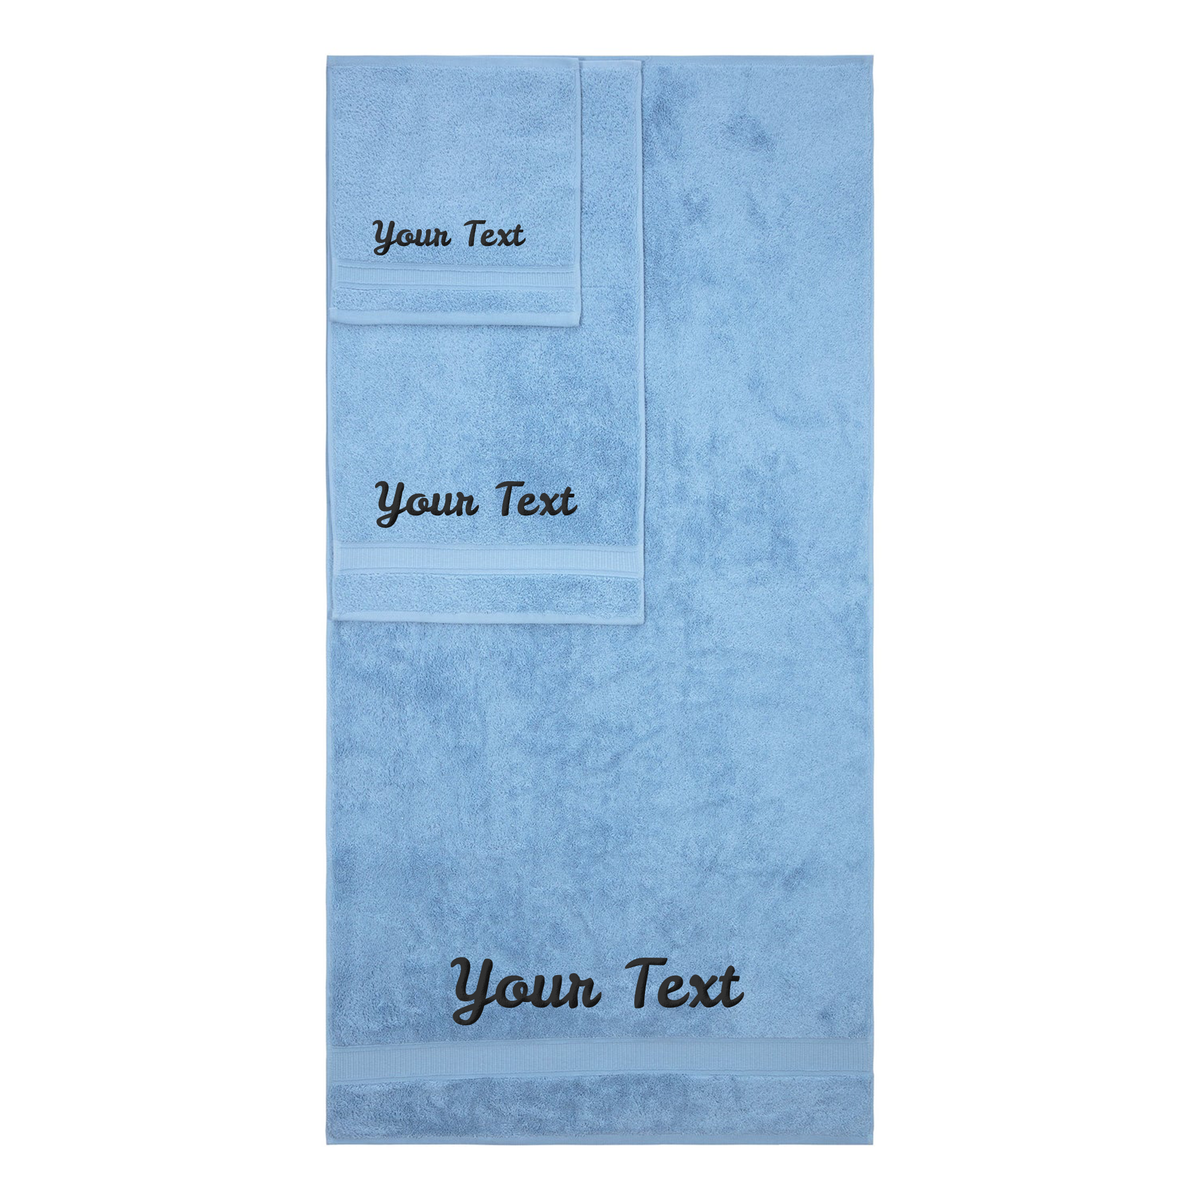 Personalized Towels, Hotel & Spa Quality, Super Soft, Highly Absorbent, 100% Turkish Genuine Cotton Monogrammed Towel